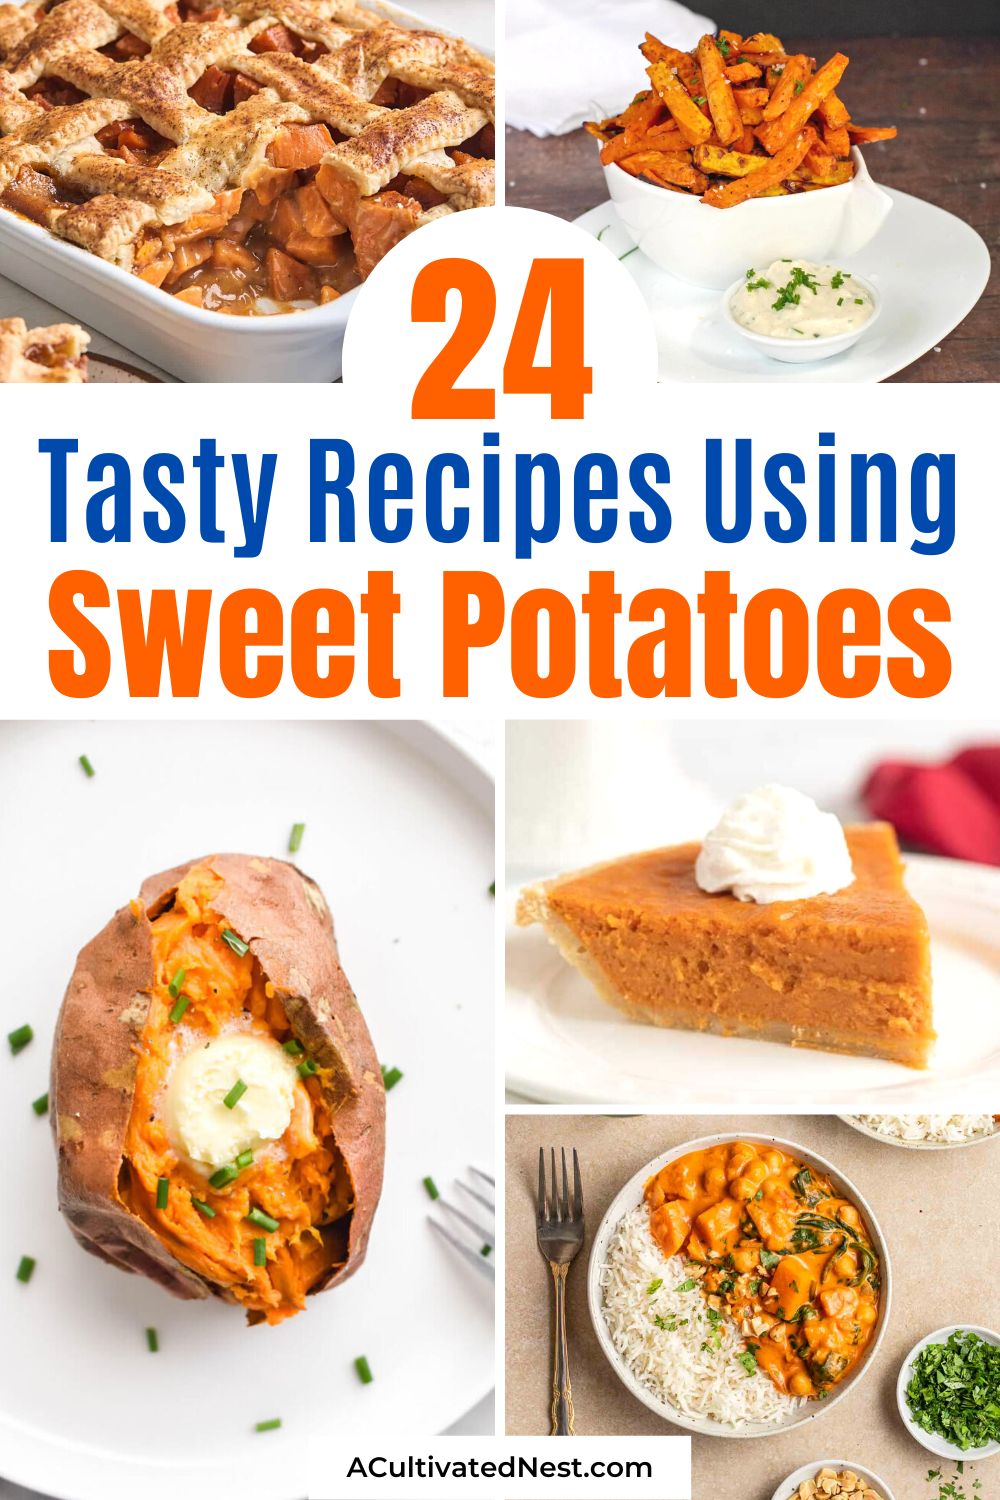 24 Tasty Recipes Using Sweet Potatoes- If you want to make a delicious fall dish, then you should include a dish from this collection of tasty recipes using sweet potatoes! | sweet potato desserts, sweet potato sides, fall desserts, #sweetPotatoRecipes #fallRecipes #recipes #sides #ACultivatedNest